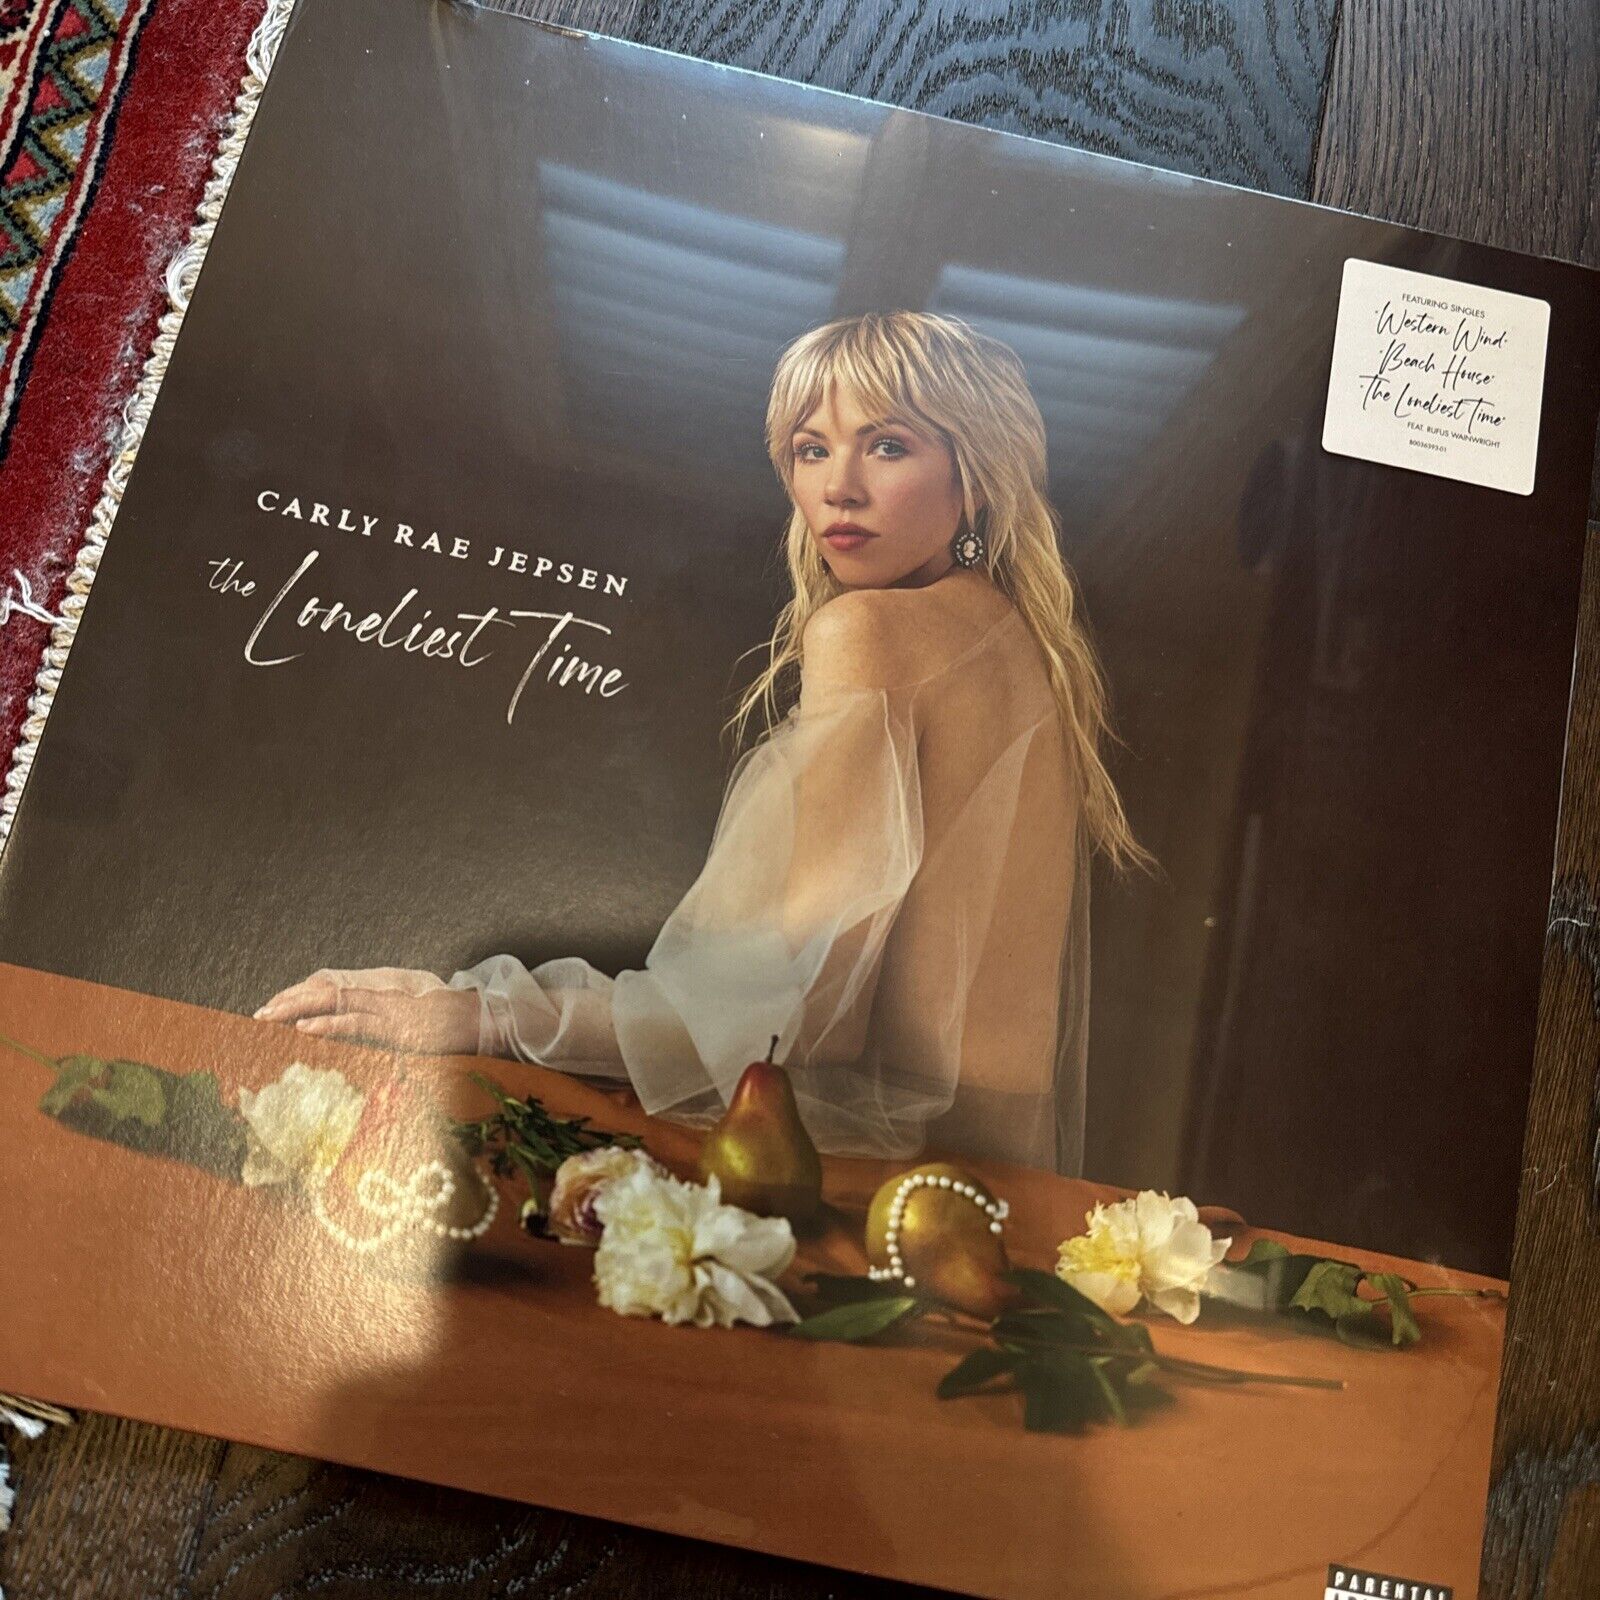 The Loneliest Time-Ltd Crystal Rose Vinyl Carly Rae Jepsen Record Sealed